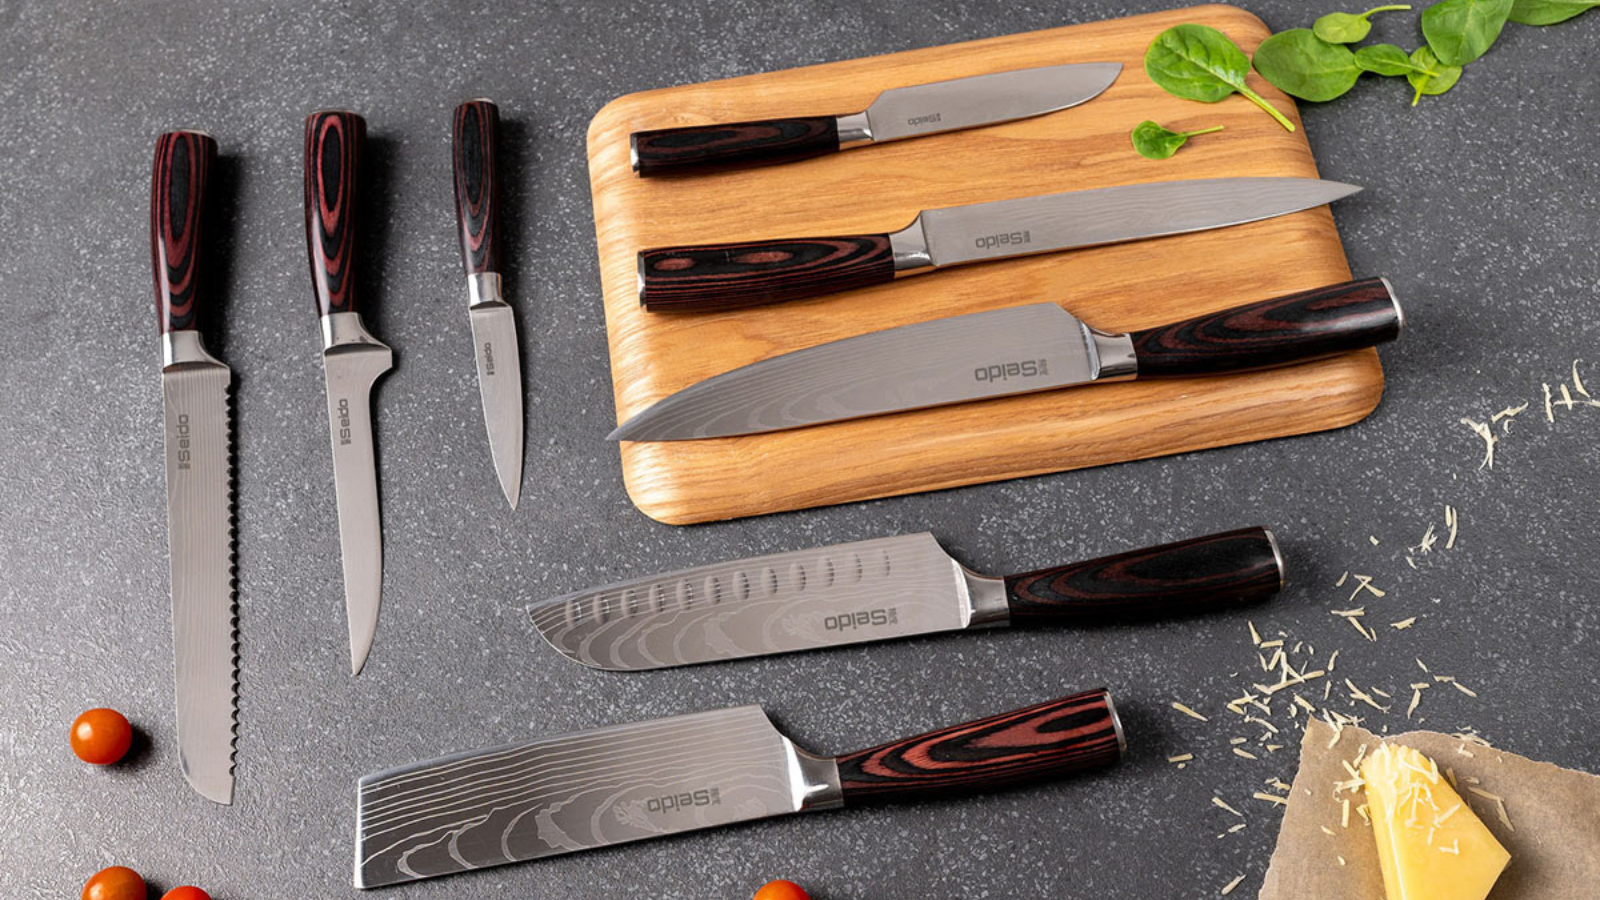 Does your valentine love to cook? They’ll love a set of Japanese chef knives, now under $100.